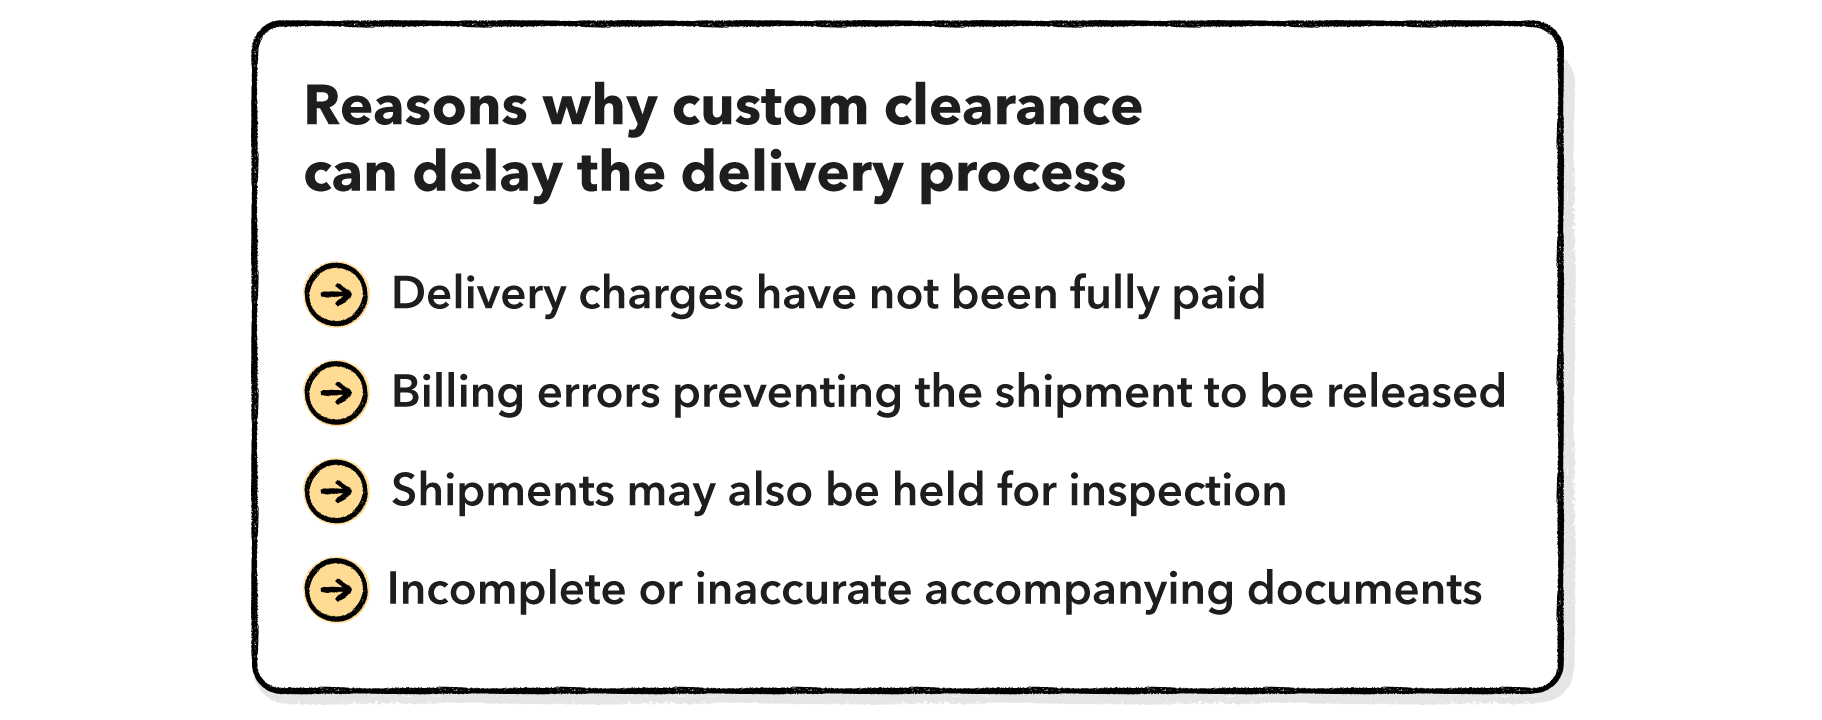 Reasons why custom clearance cand delay the delivery process